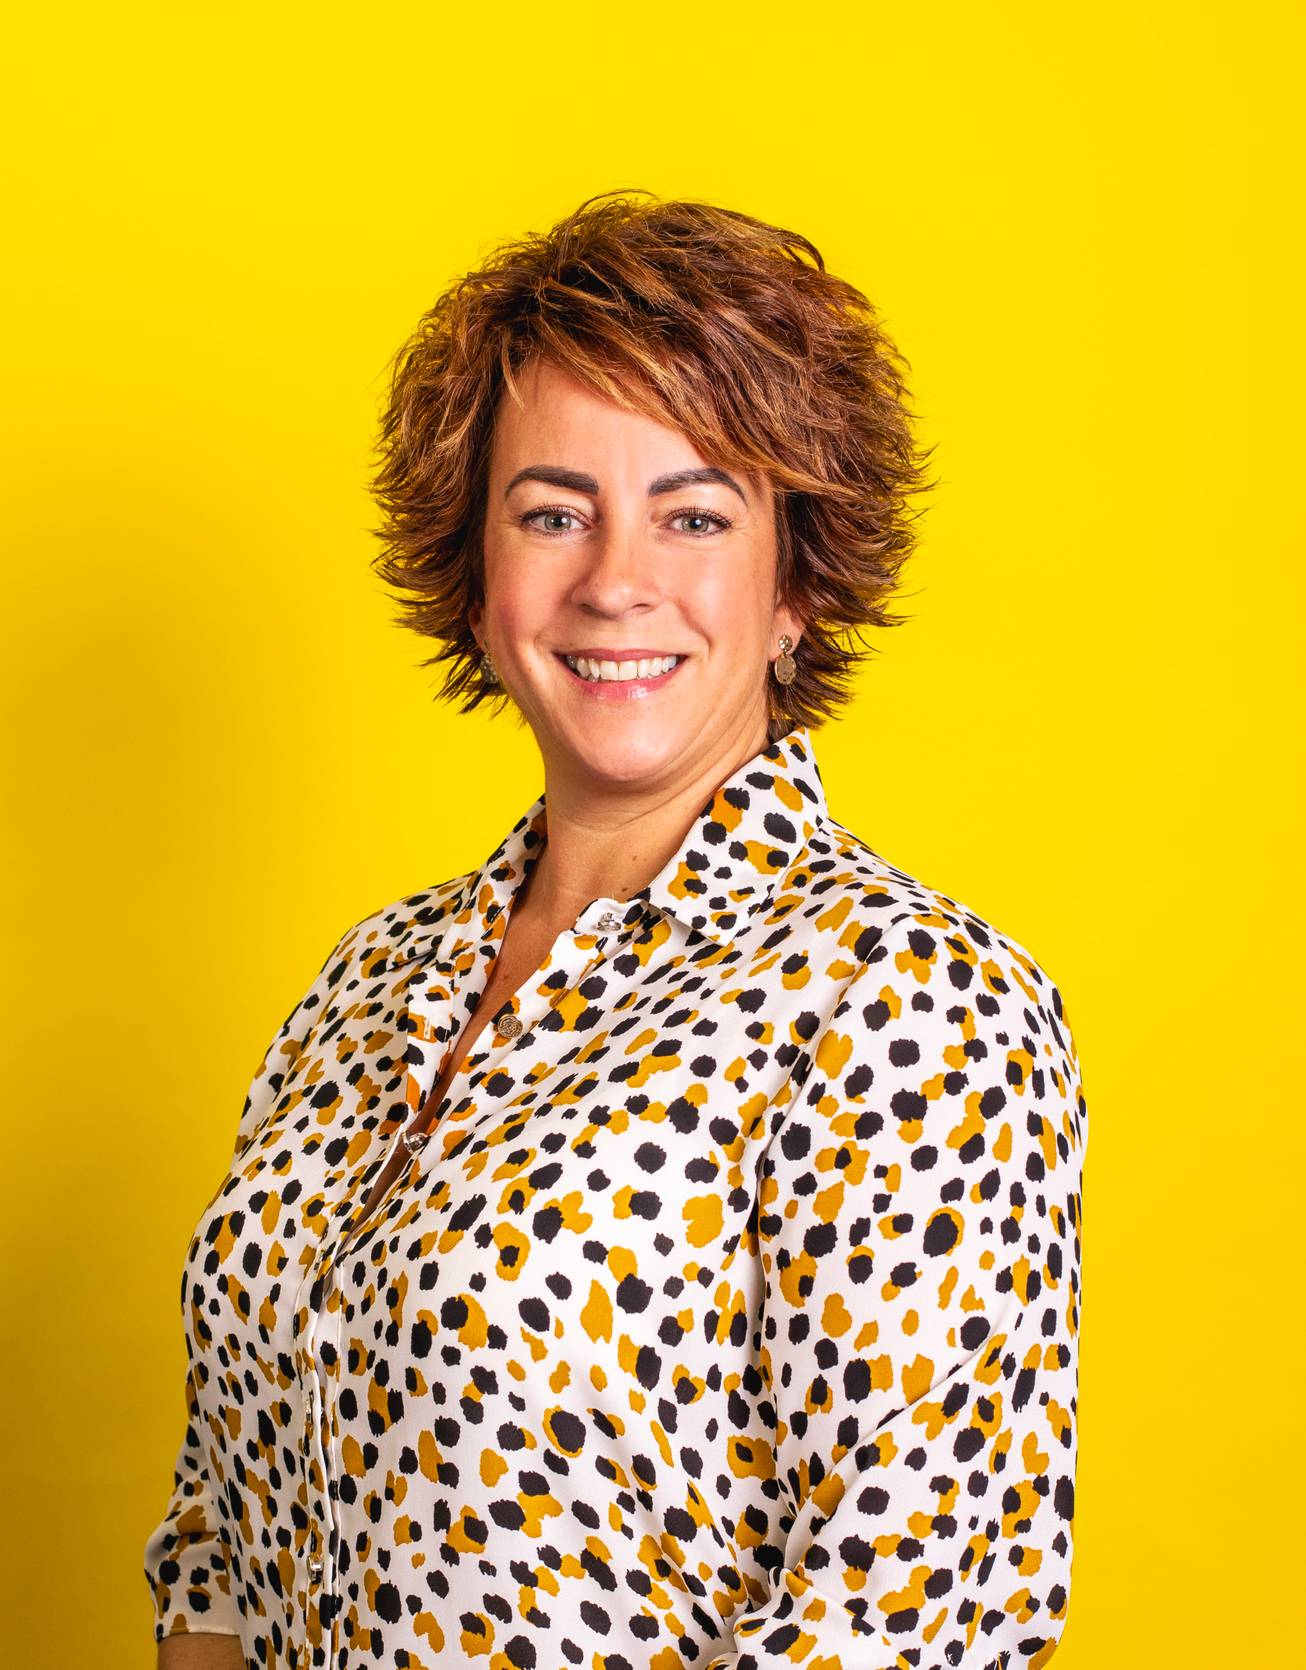 Georgie Andrews profile picture on yellow background